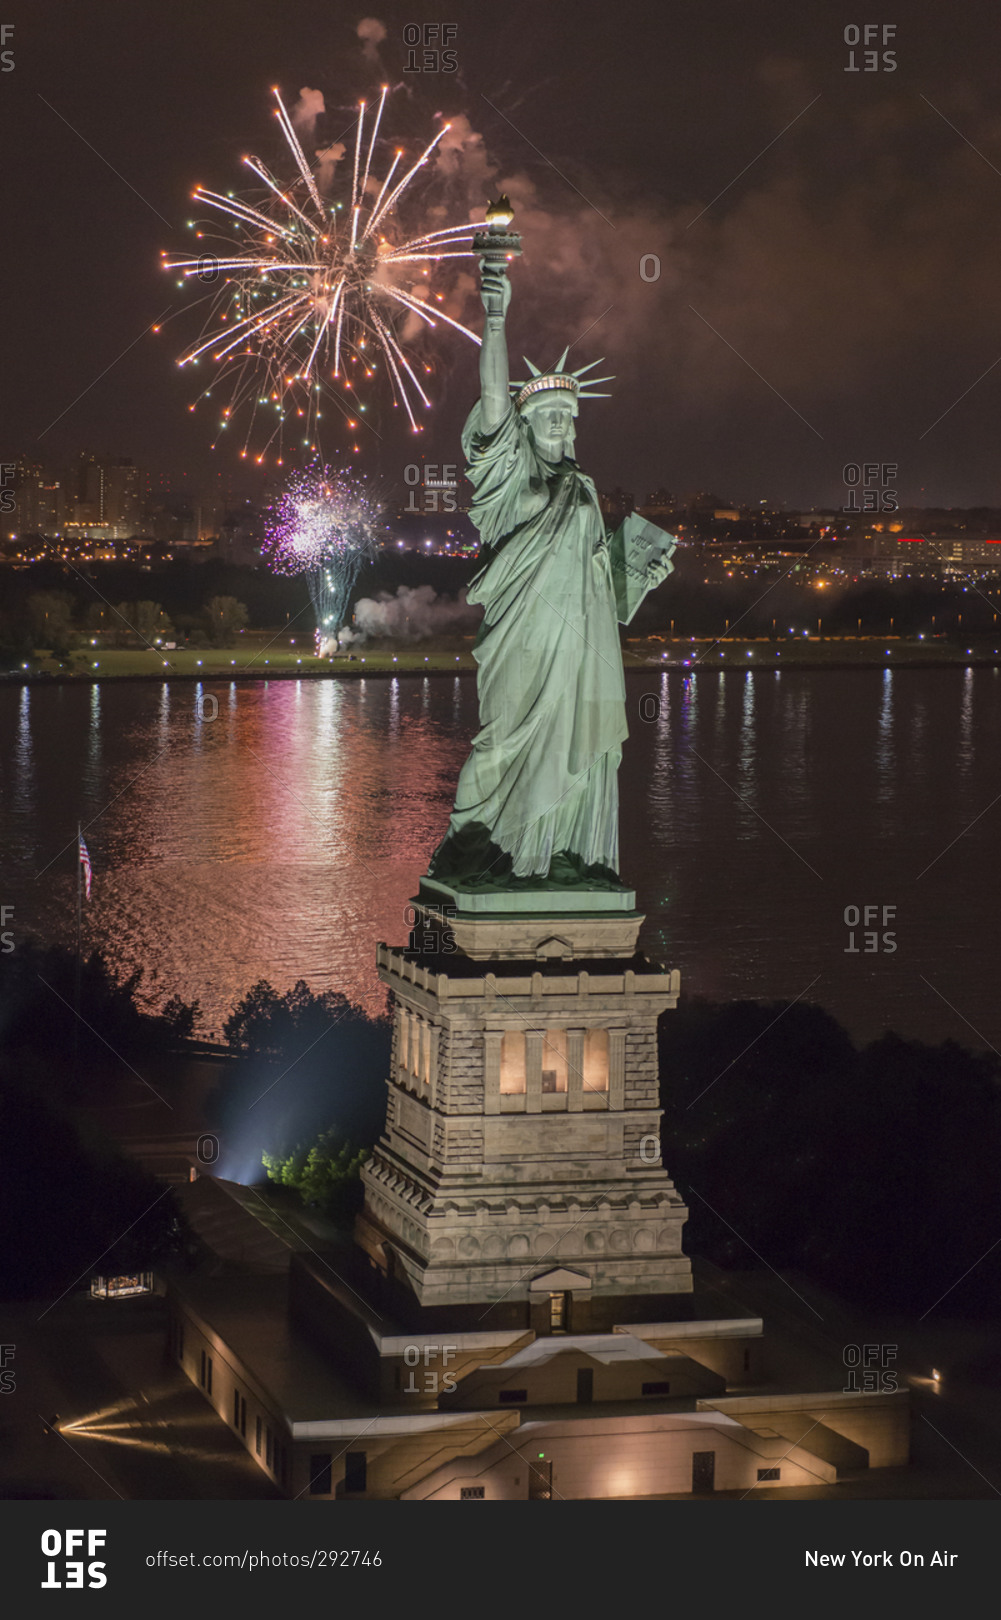 The Statue of Liberty on the 4th of July, New York, NY stock photo OFFSET